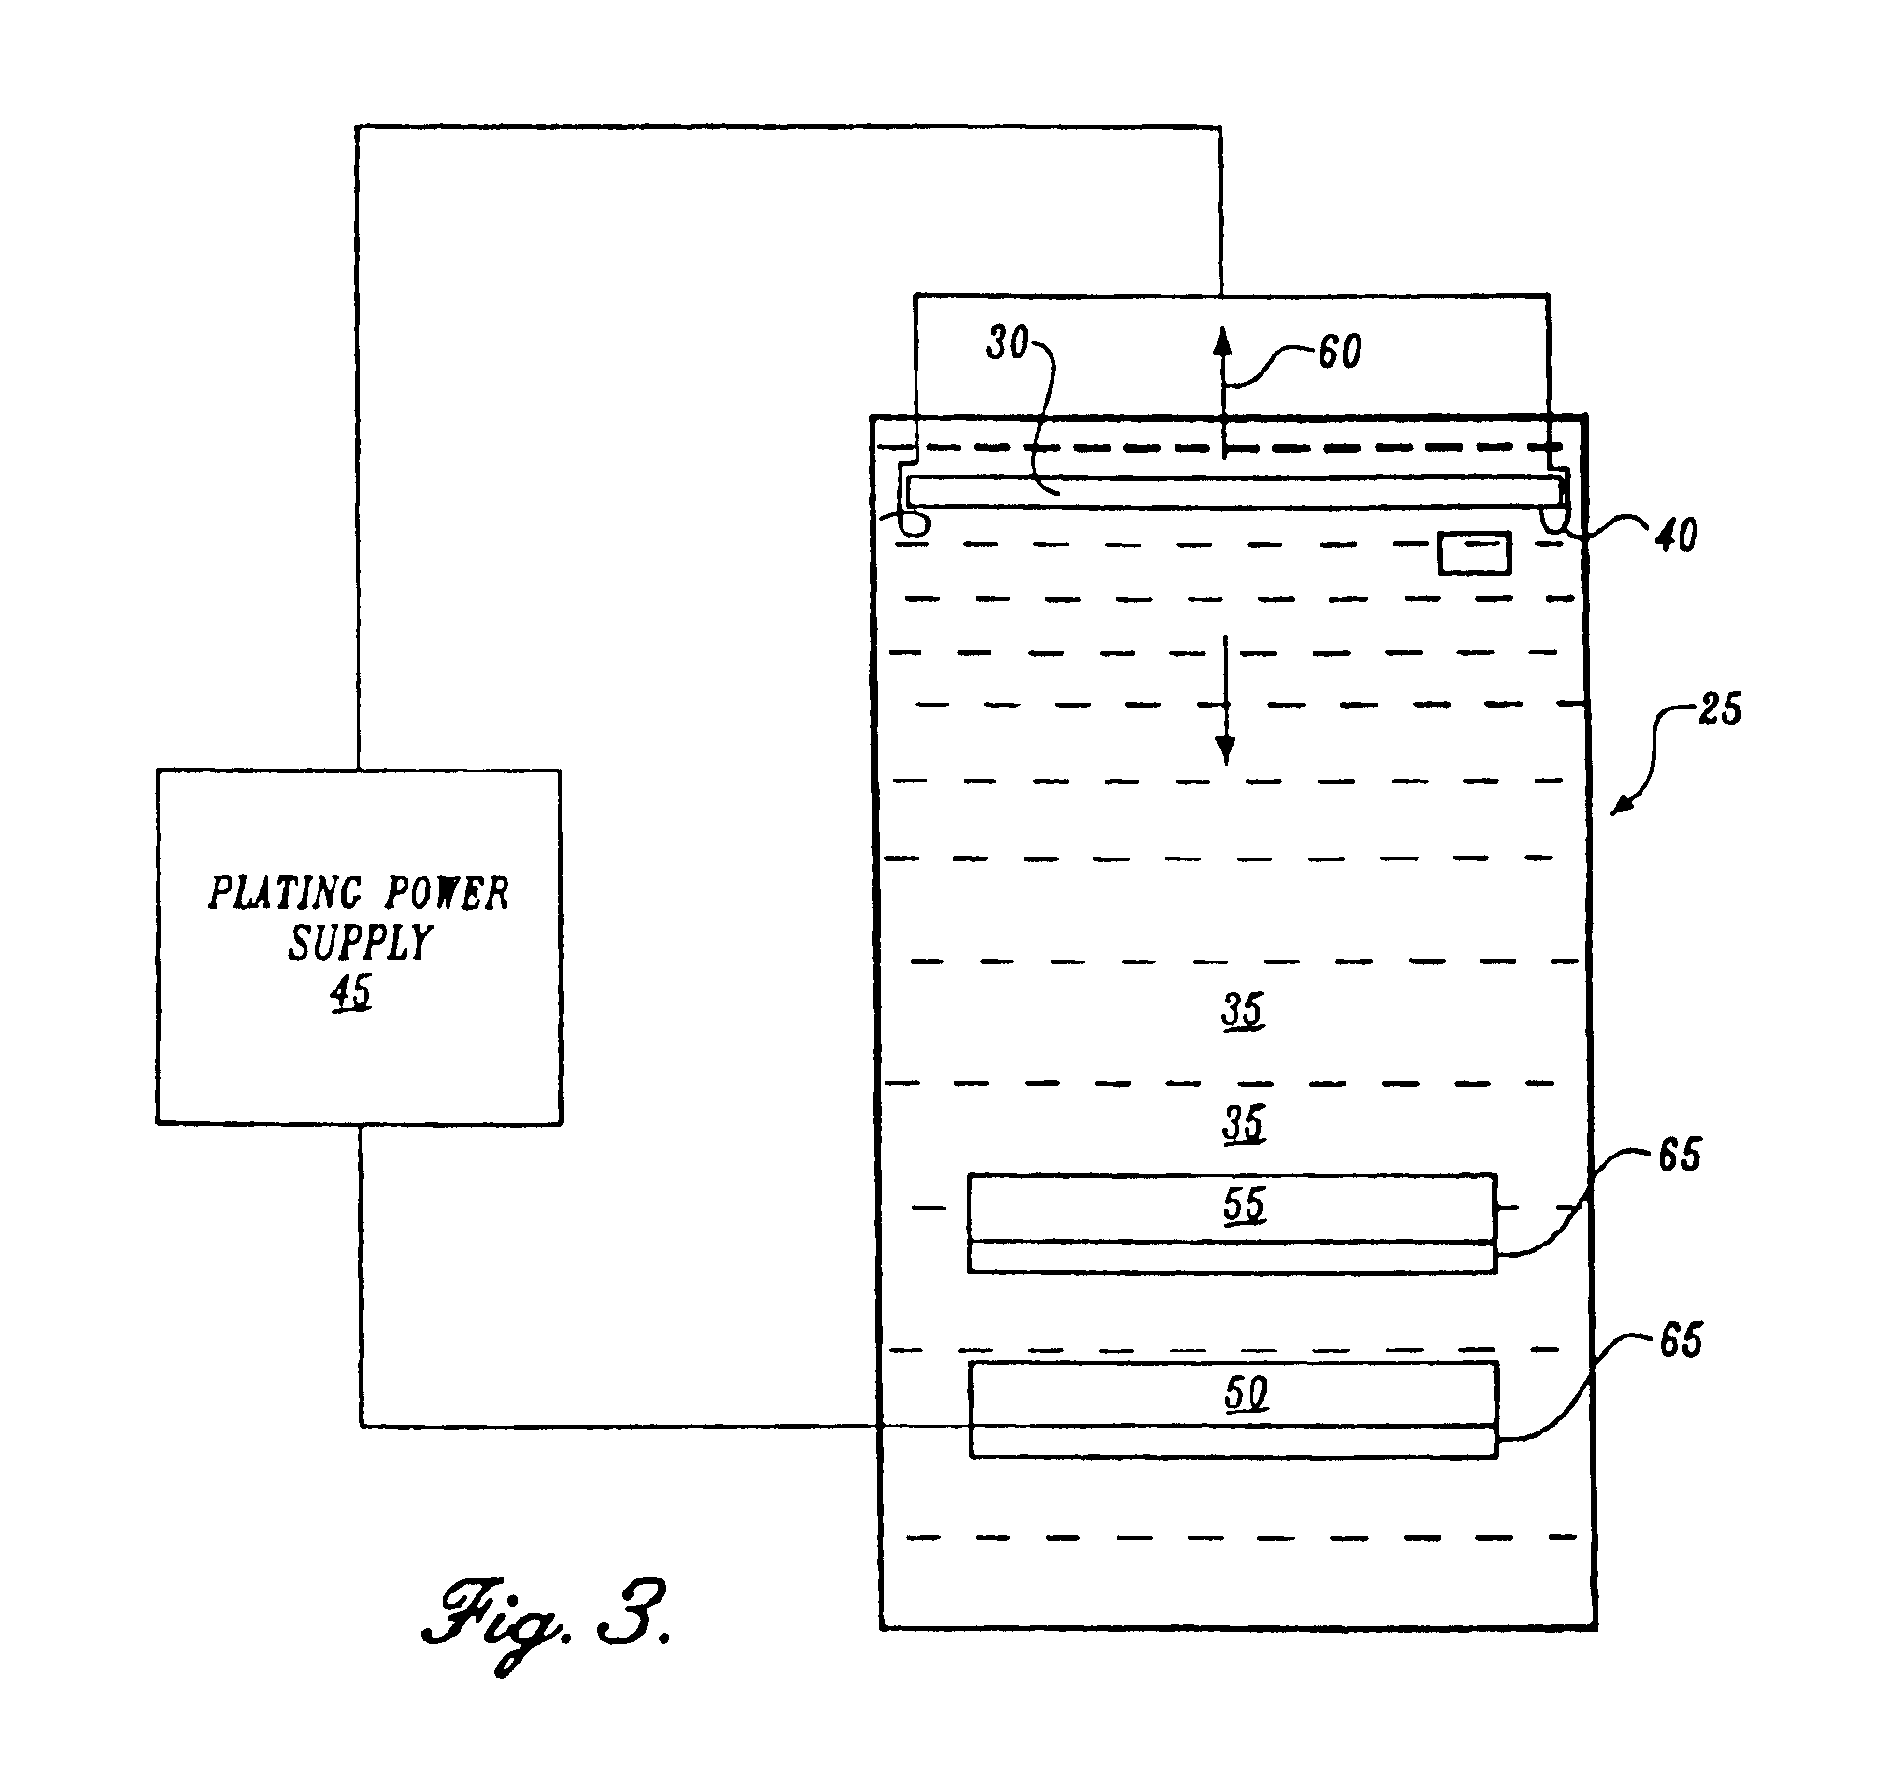 Apparatus and method for electrolytically depositing copper on a semiconductor workpiece